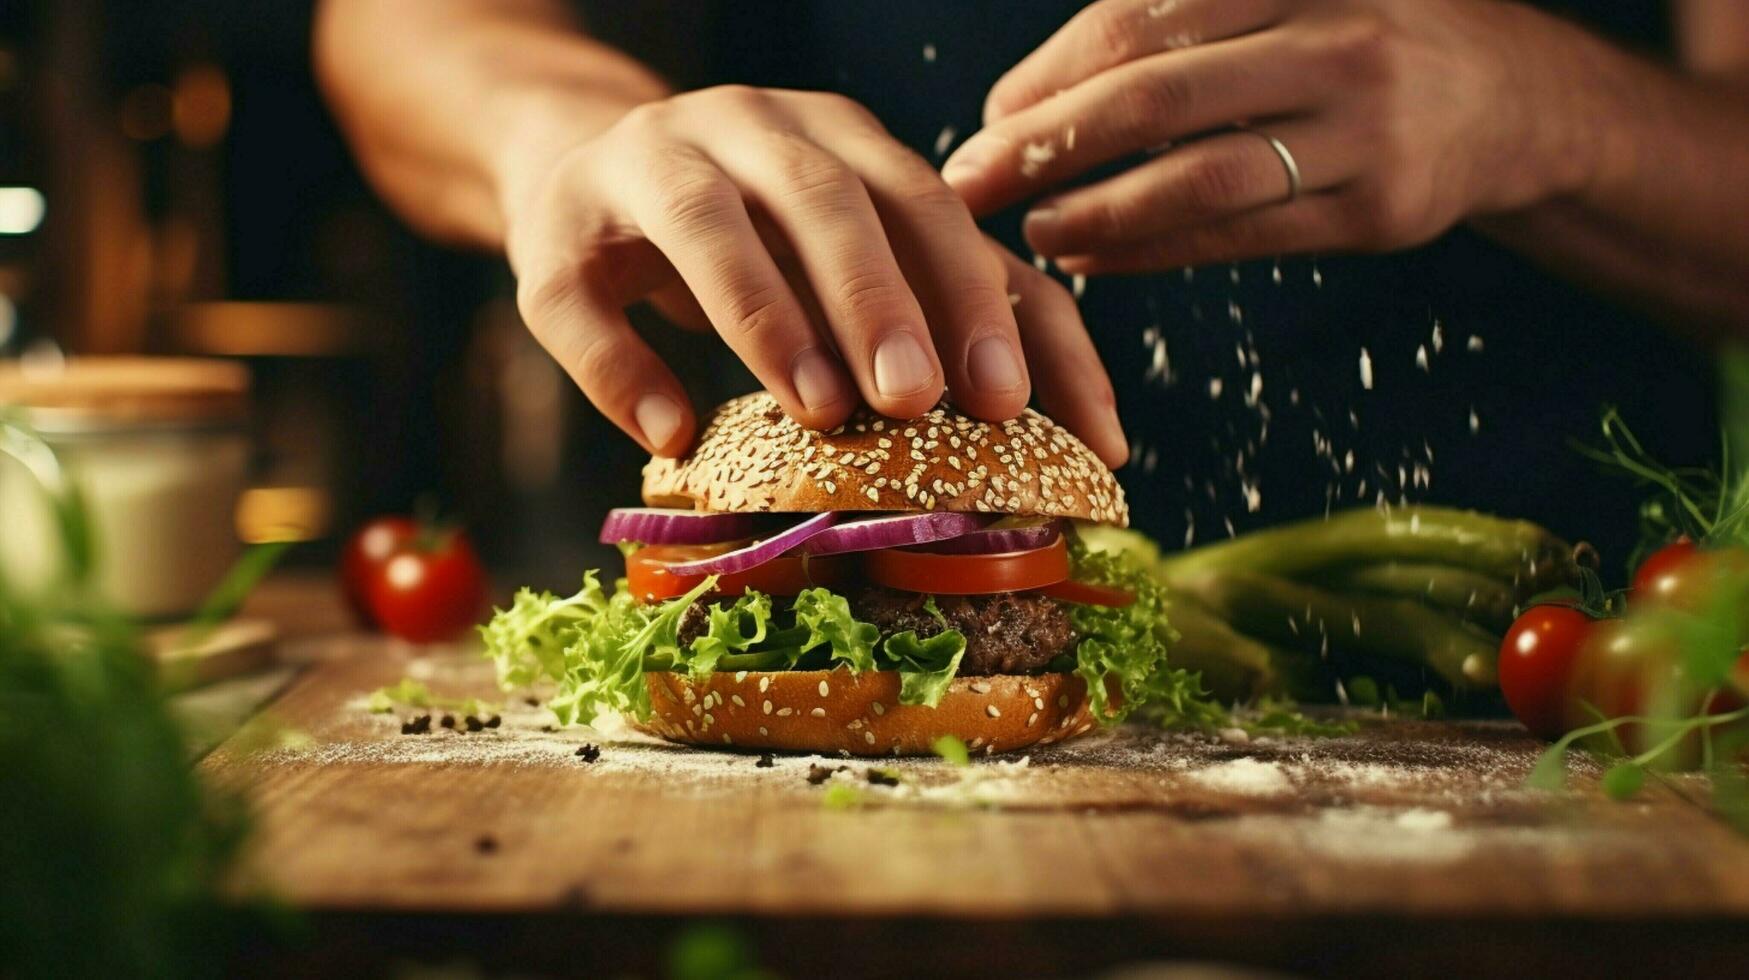 hand prepares homemade burger on rustic wooden table photo